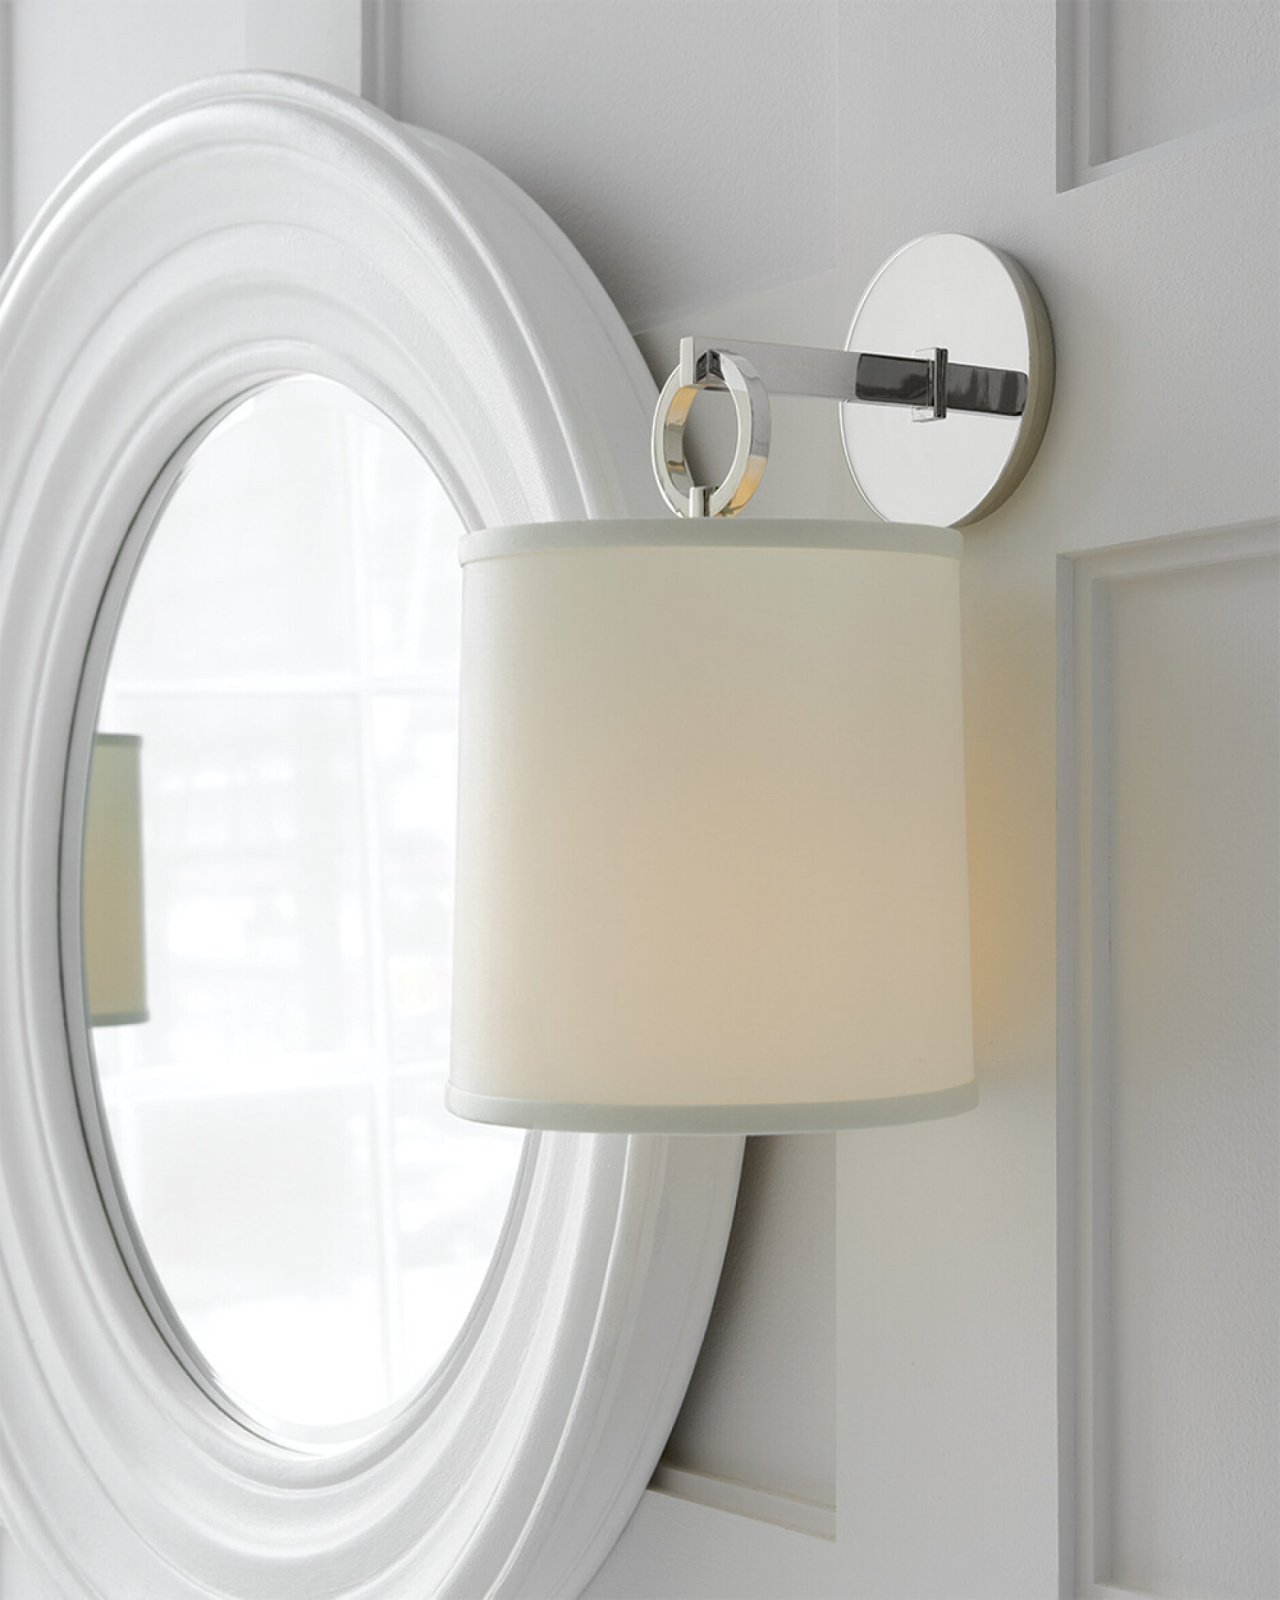 French Cuff Sconce OUTLET